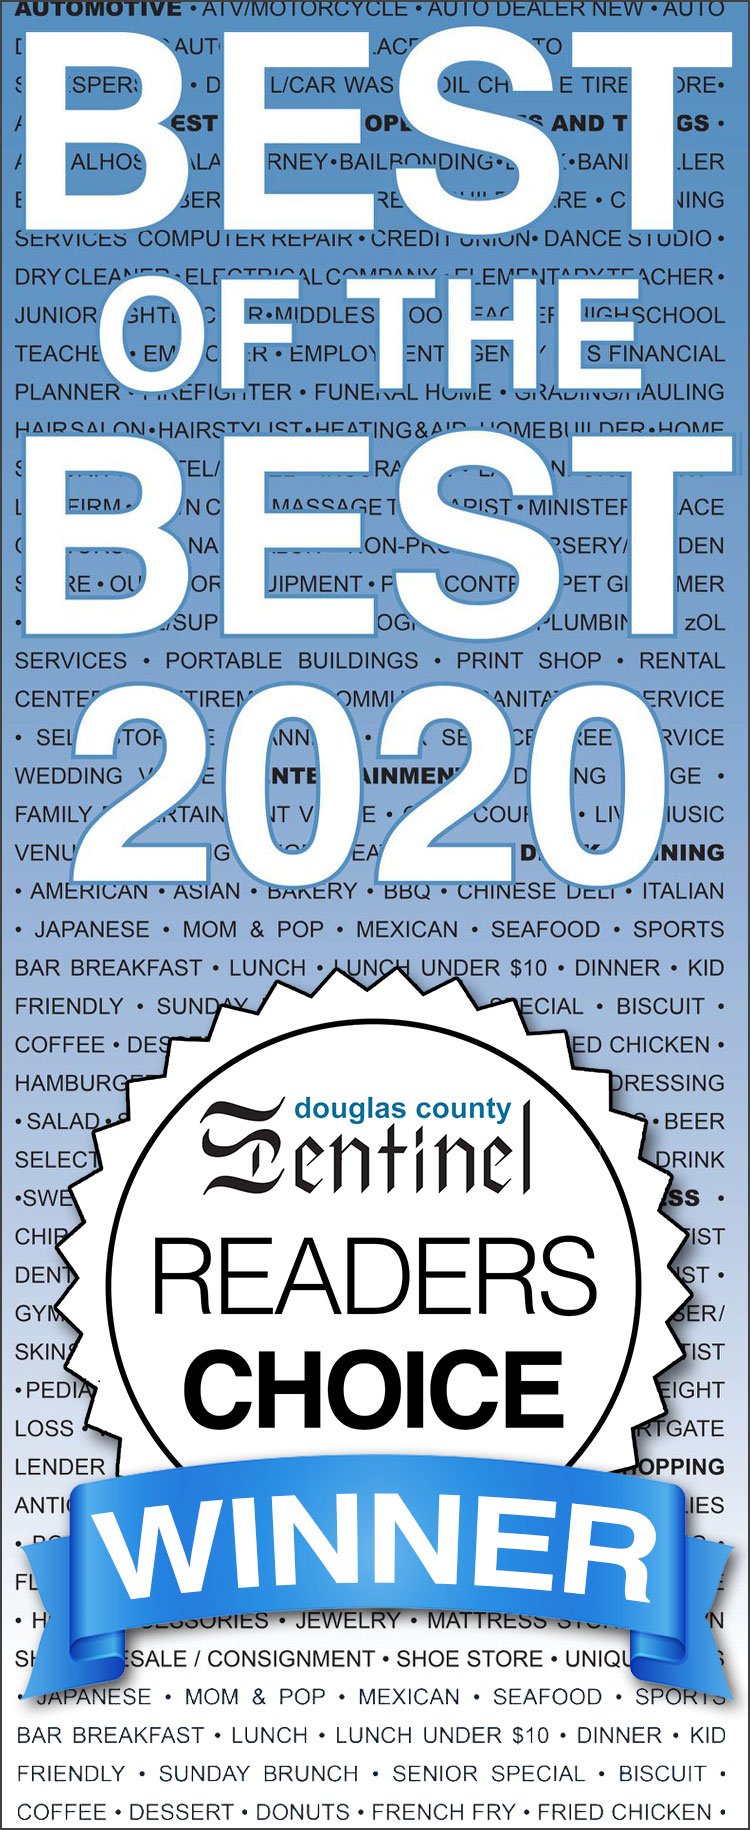 Douglas County Best Cleaning Company 2020 DC Sentinal